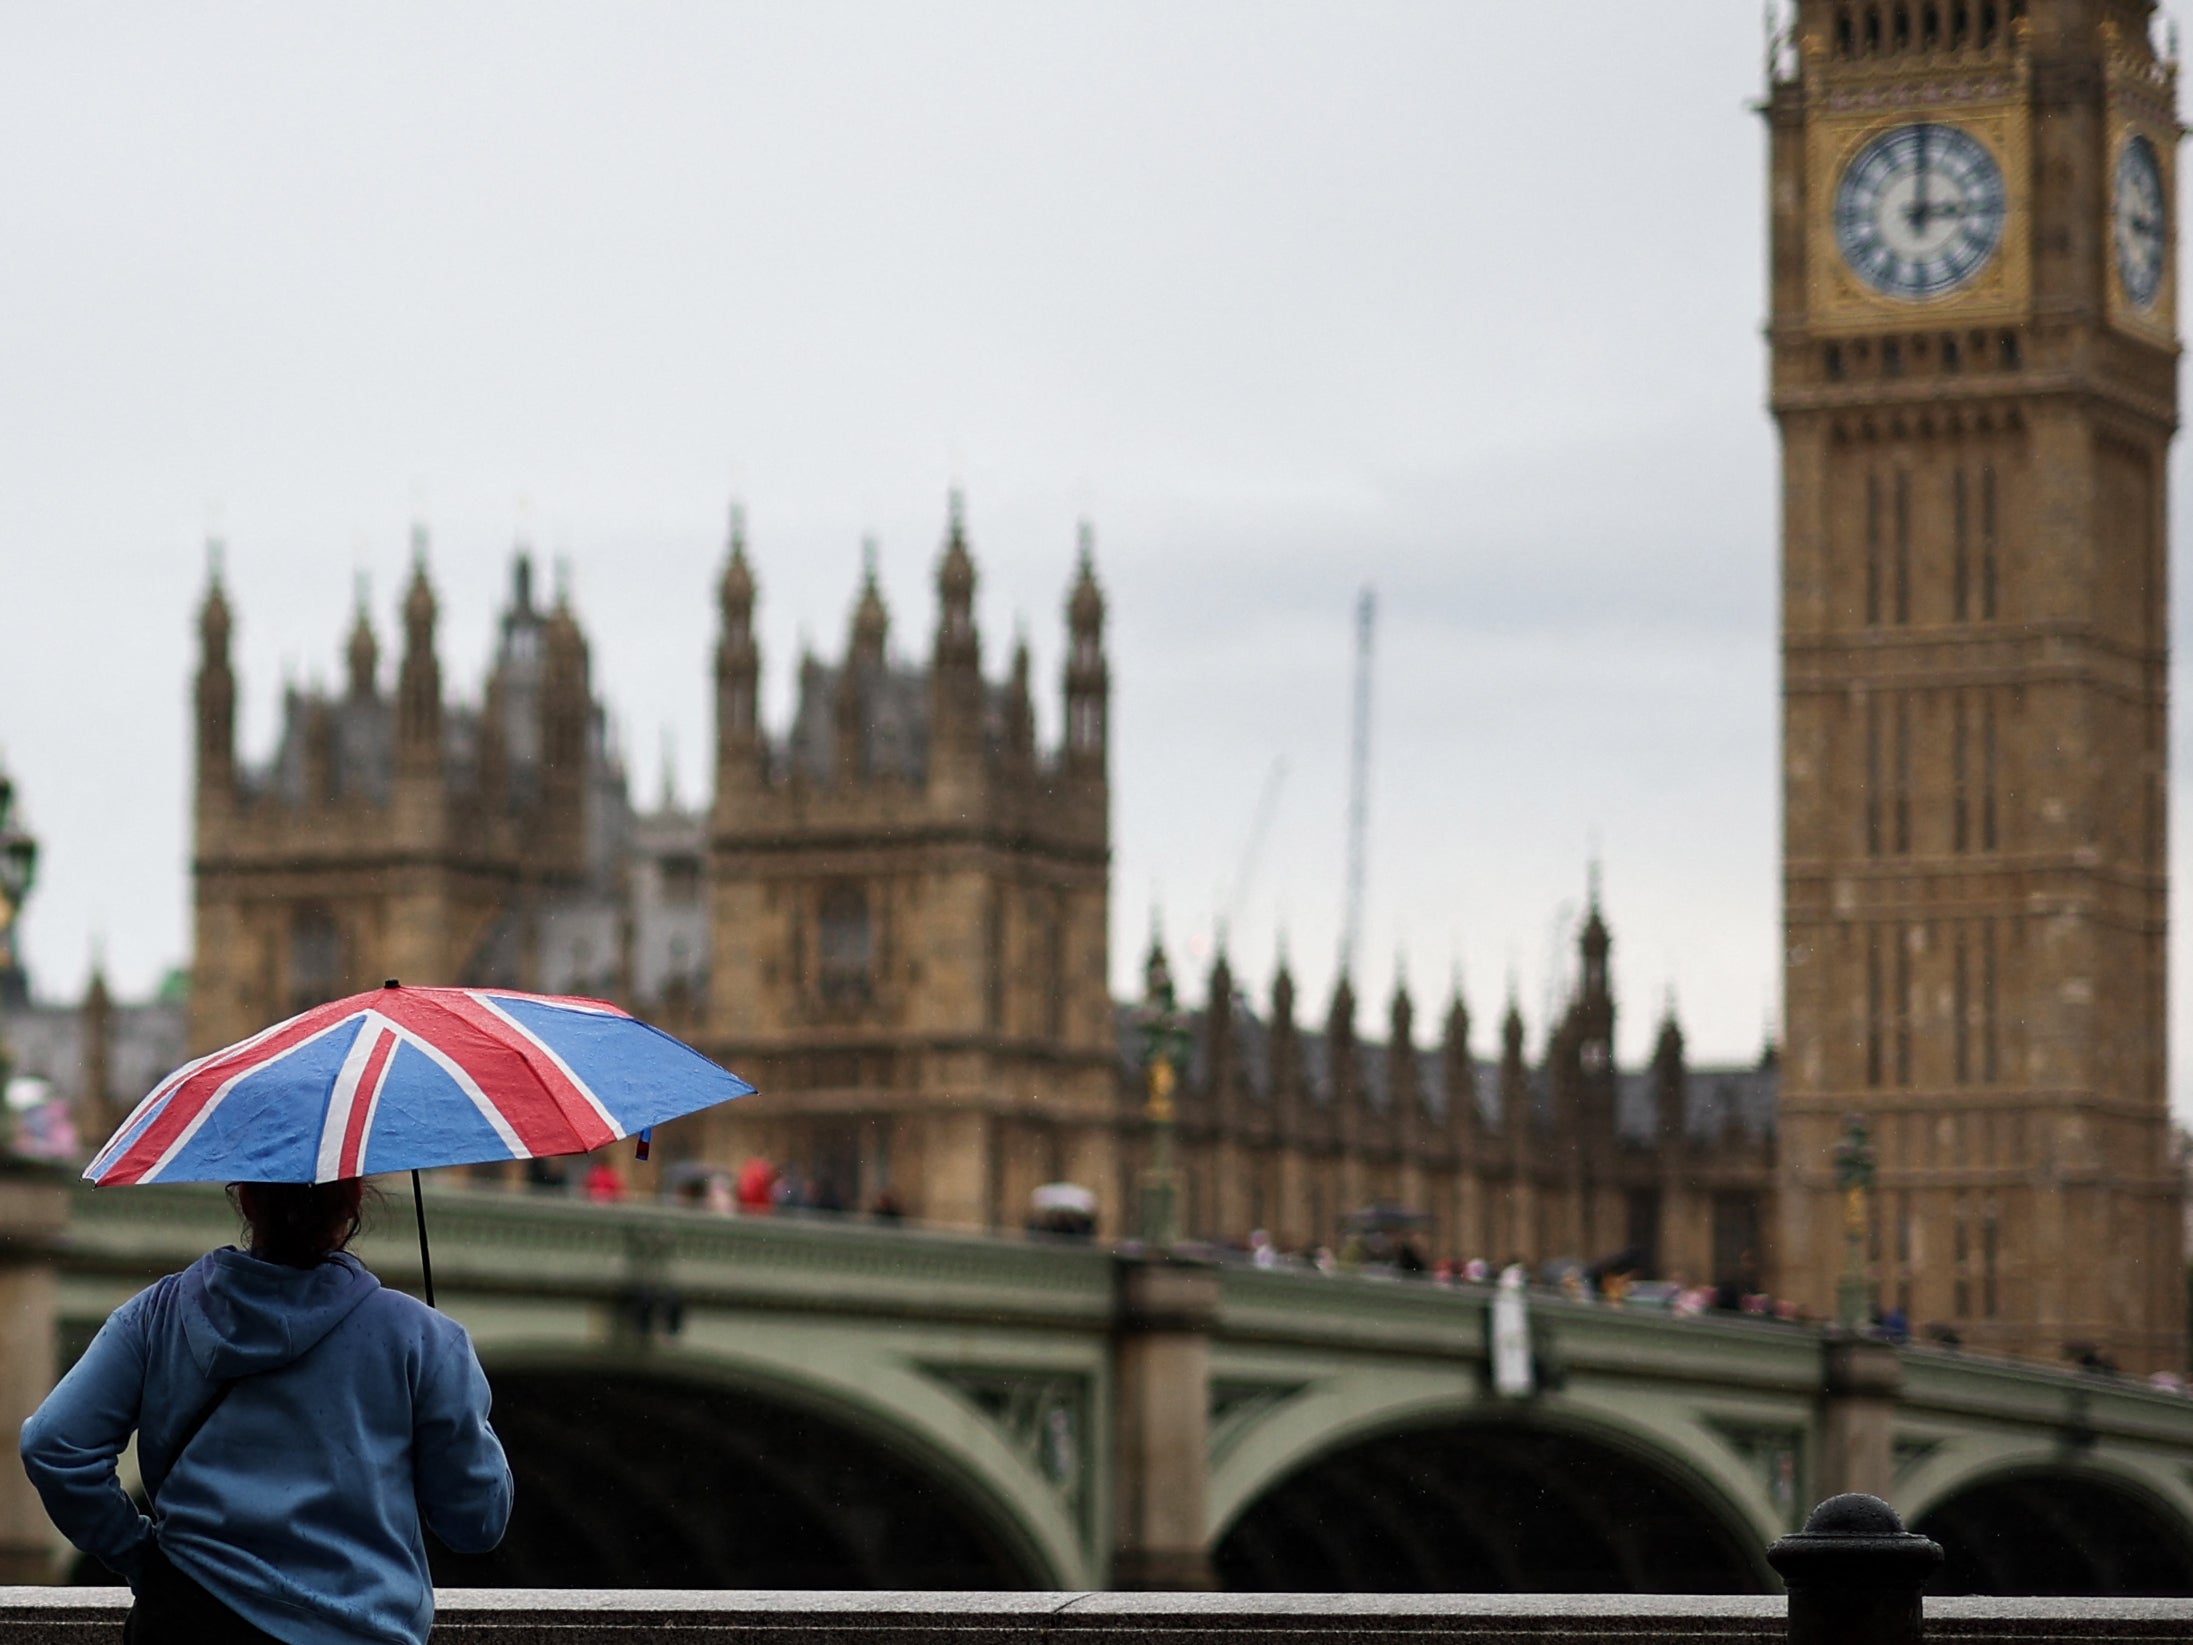 Britain is set for a rainy weekend thanks to the remnants of Hurricane Nigel